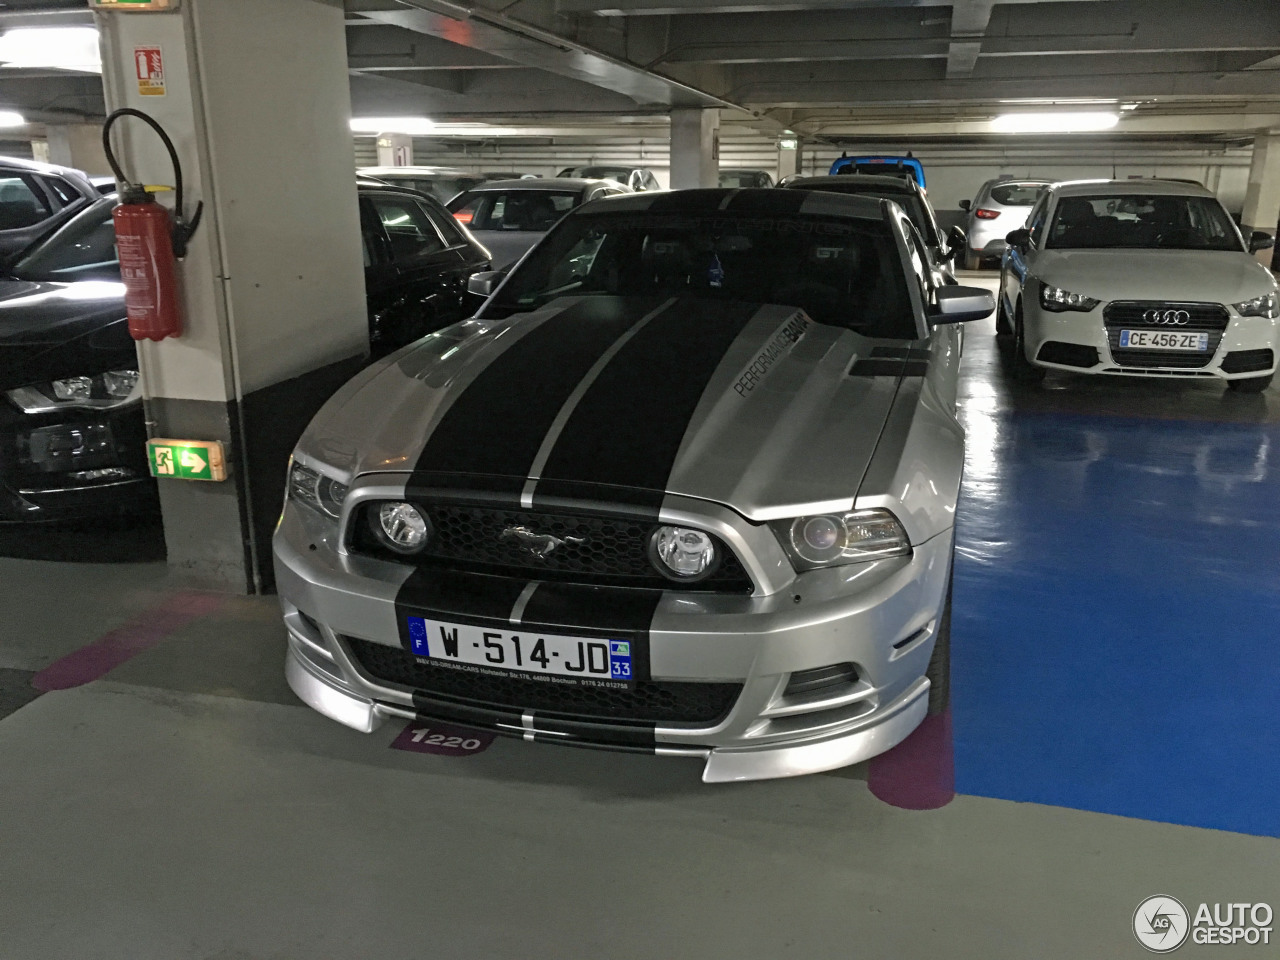 Ford Mustang GT DUB Edition